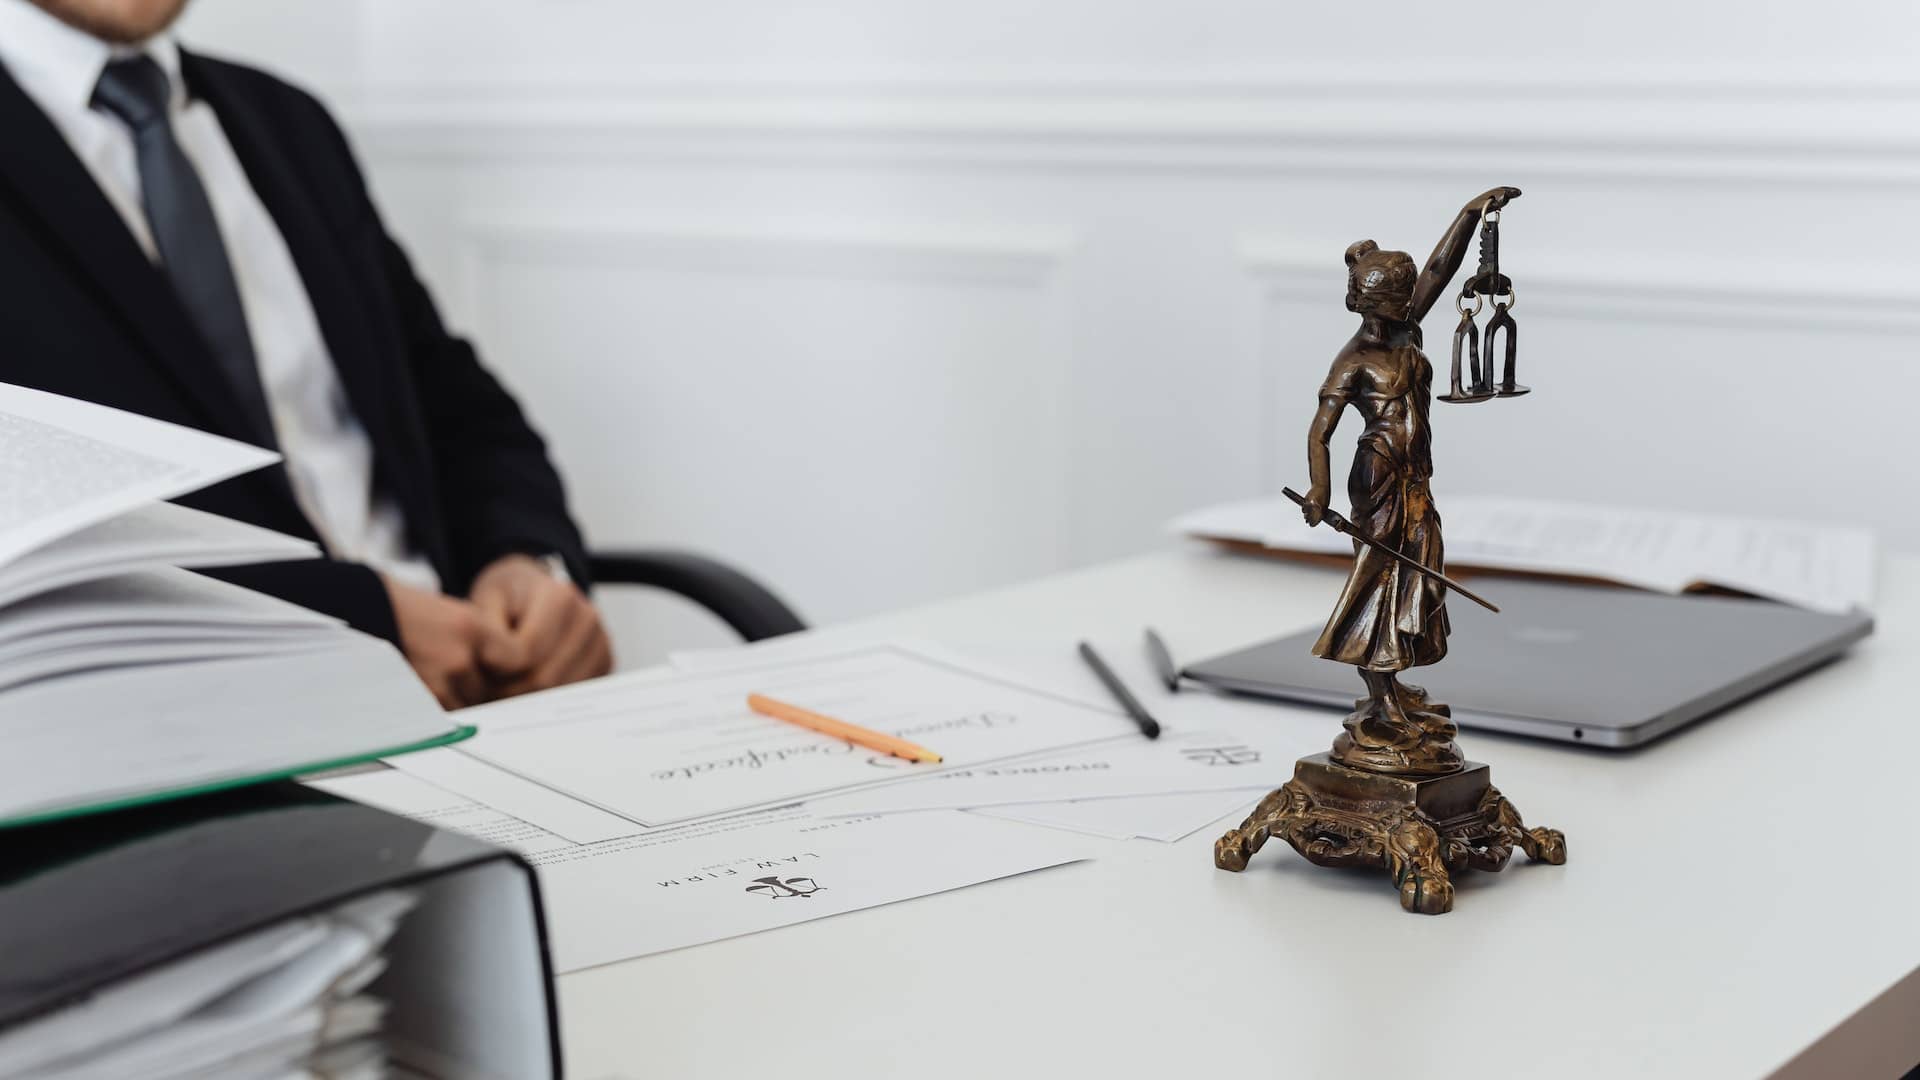 Office desk with a bronze statue of Lady Justice, a laptop, and stationery, with a blurred figure in the background